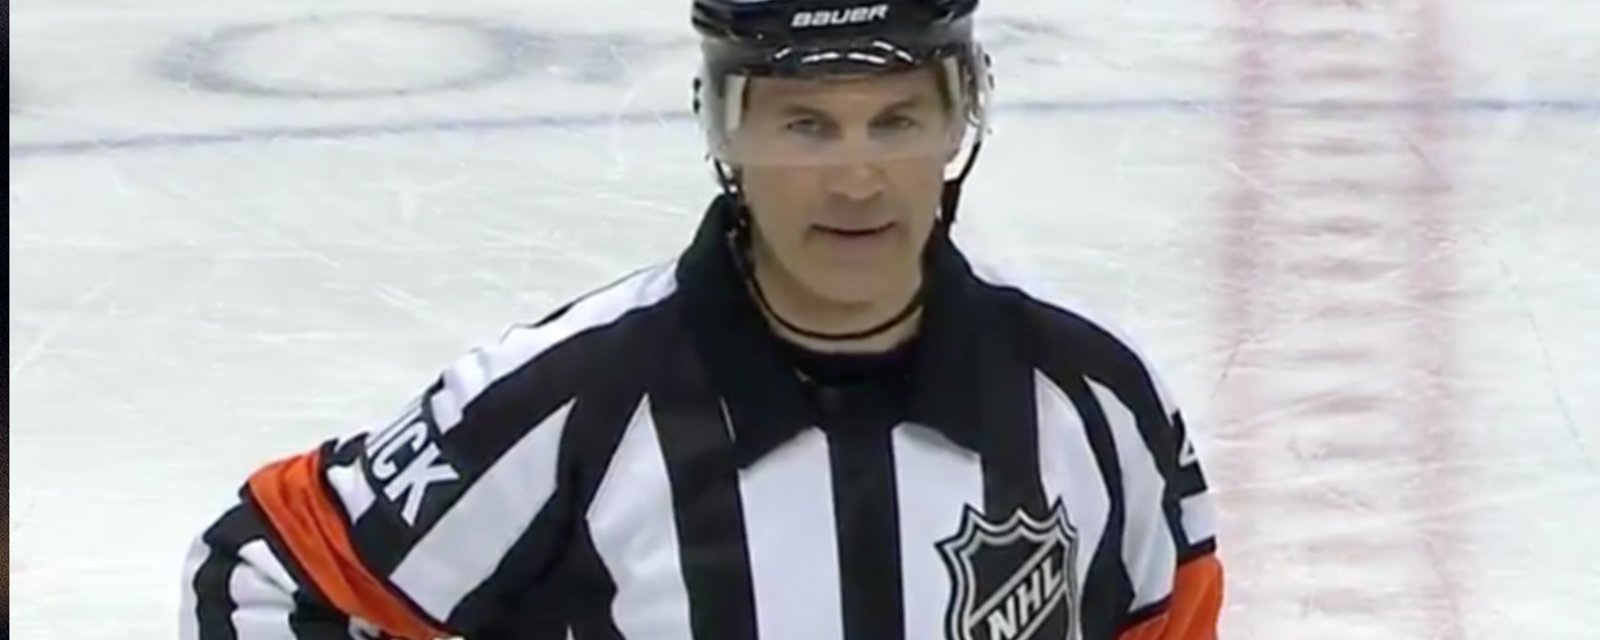 Referee Wes McCauley deserves an Oscar after yet another dramatic goal review call